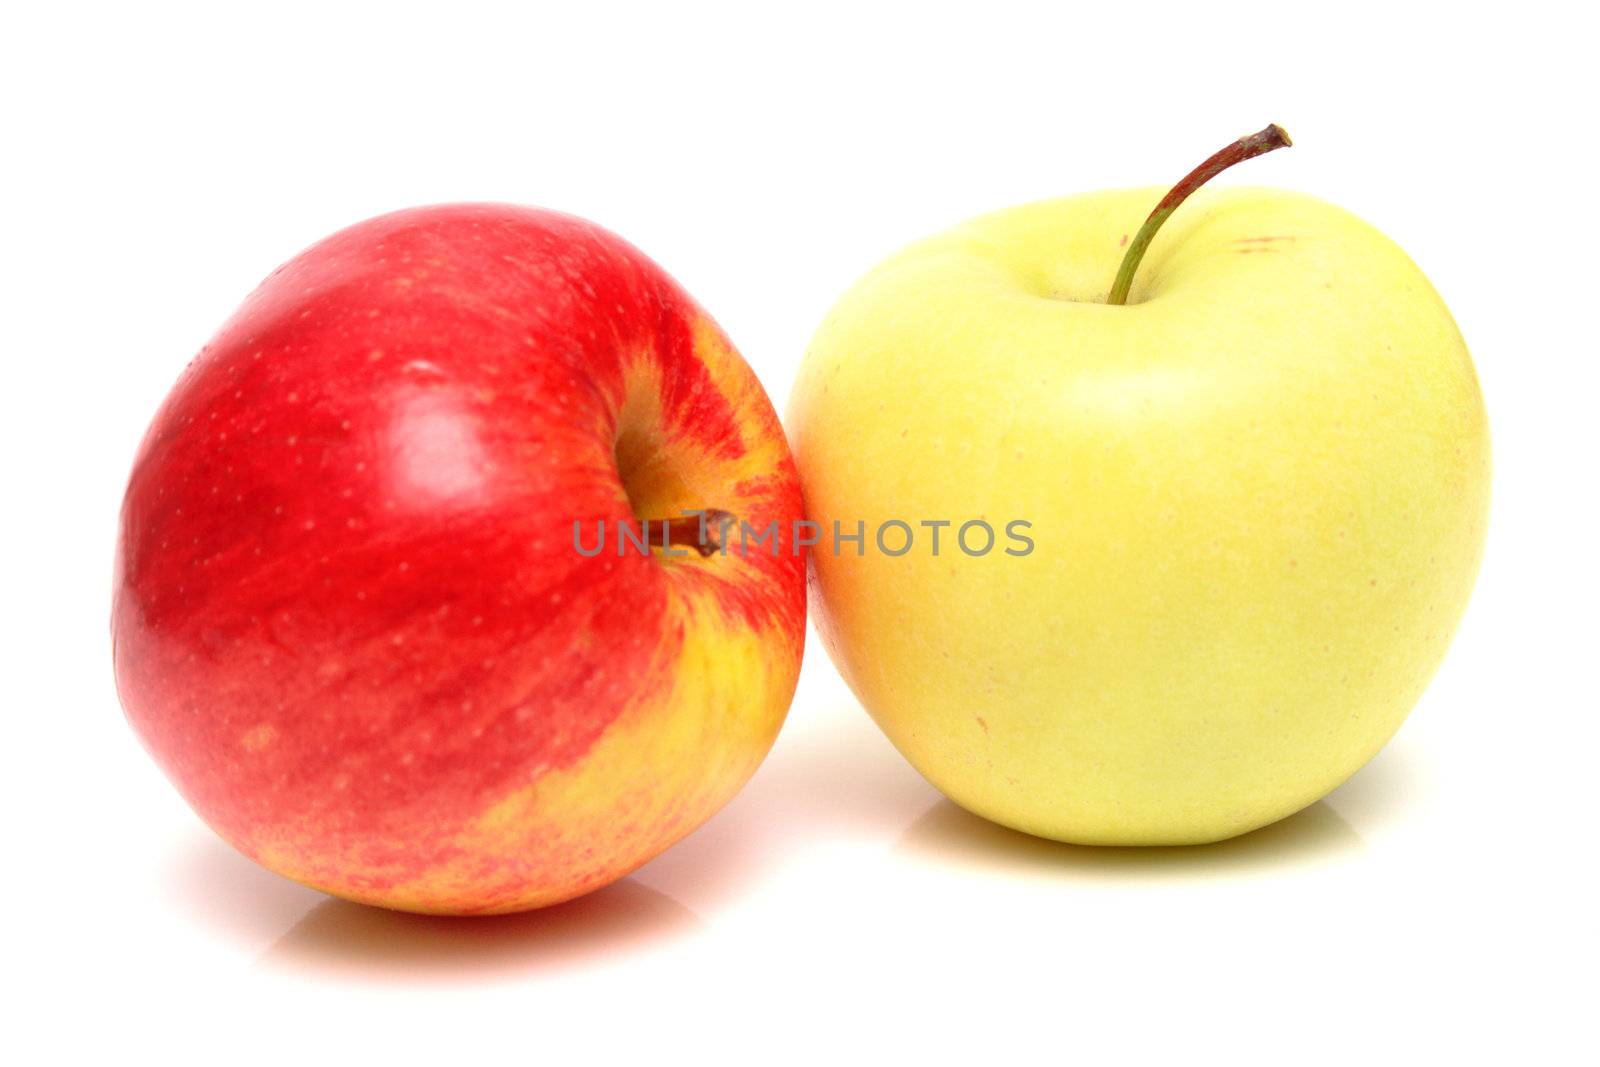 Red and yellow apples on the white background. Isolated.